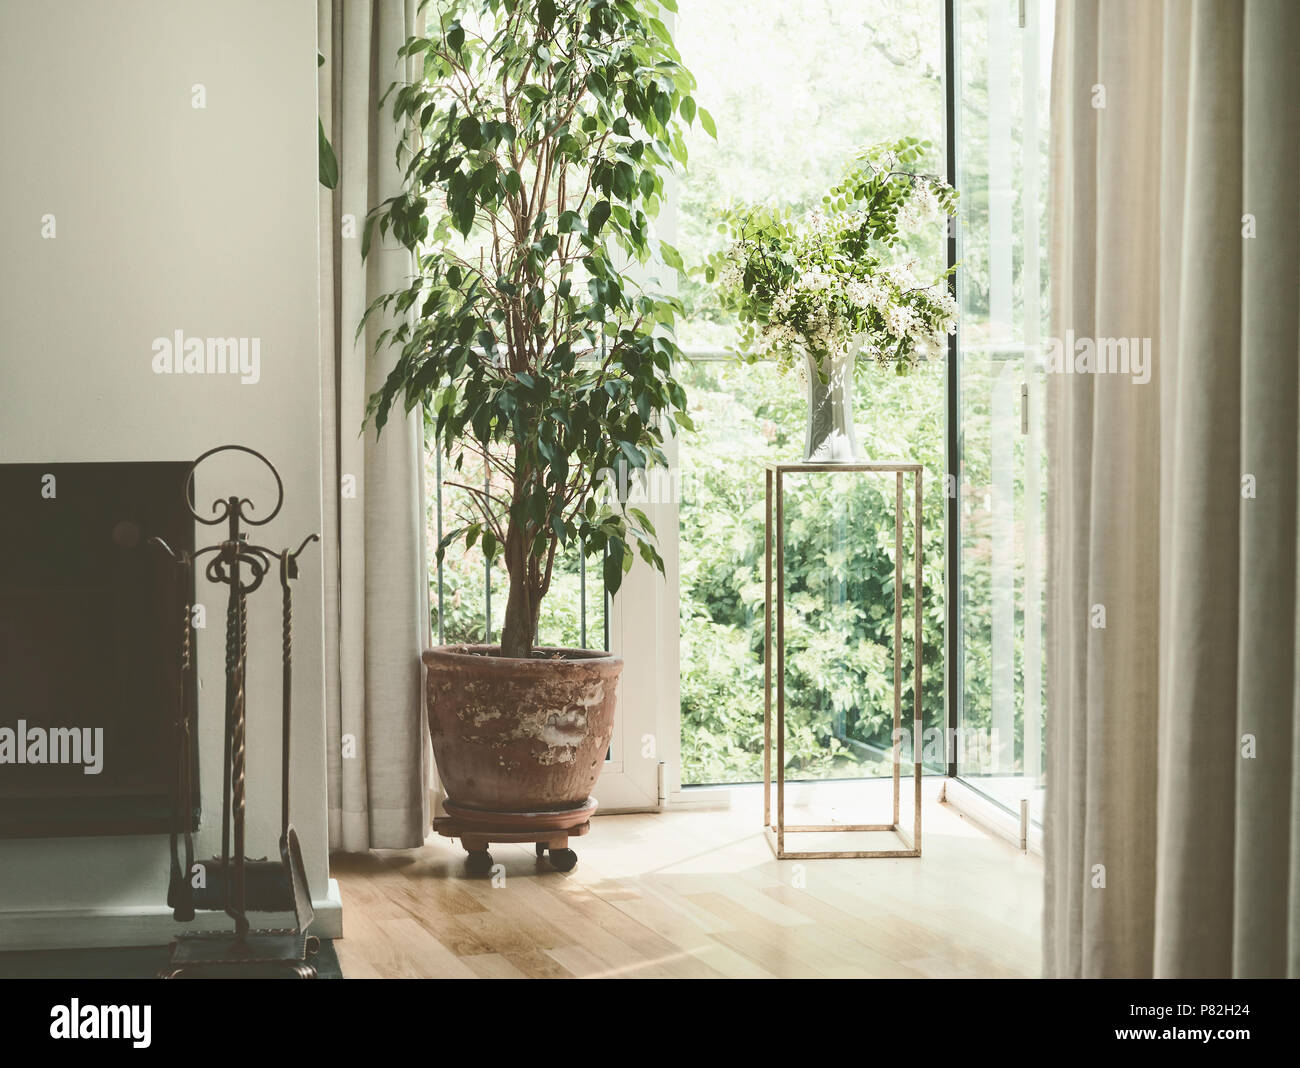 Cozy Home Interior Design With House Plants At Window